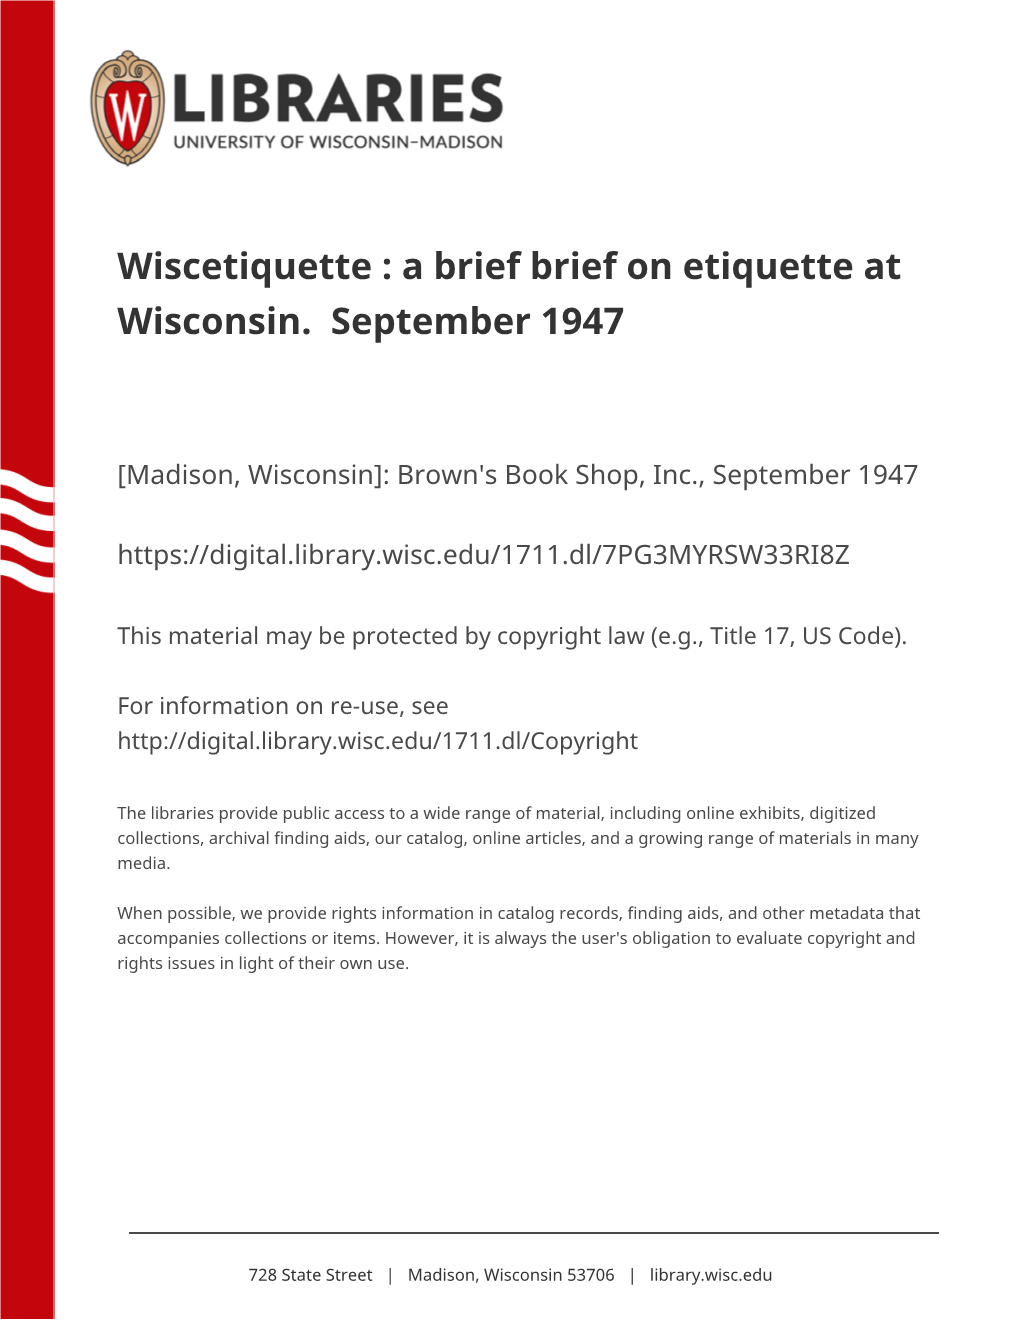 A Brief Brief on Etiquette at Wisconsin. September 1947